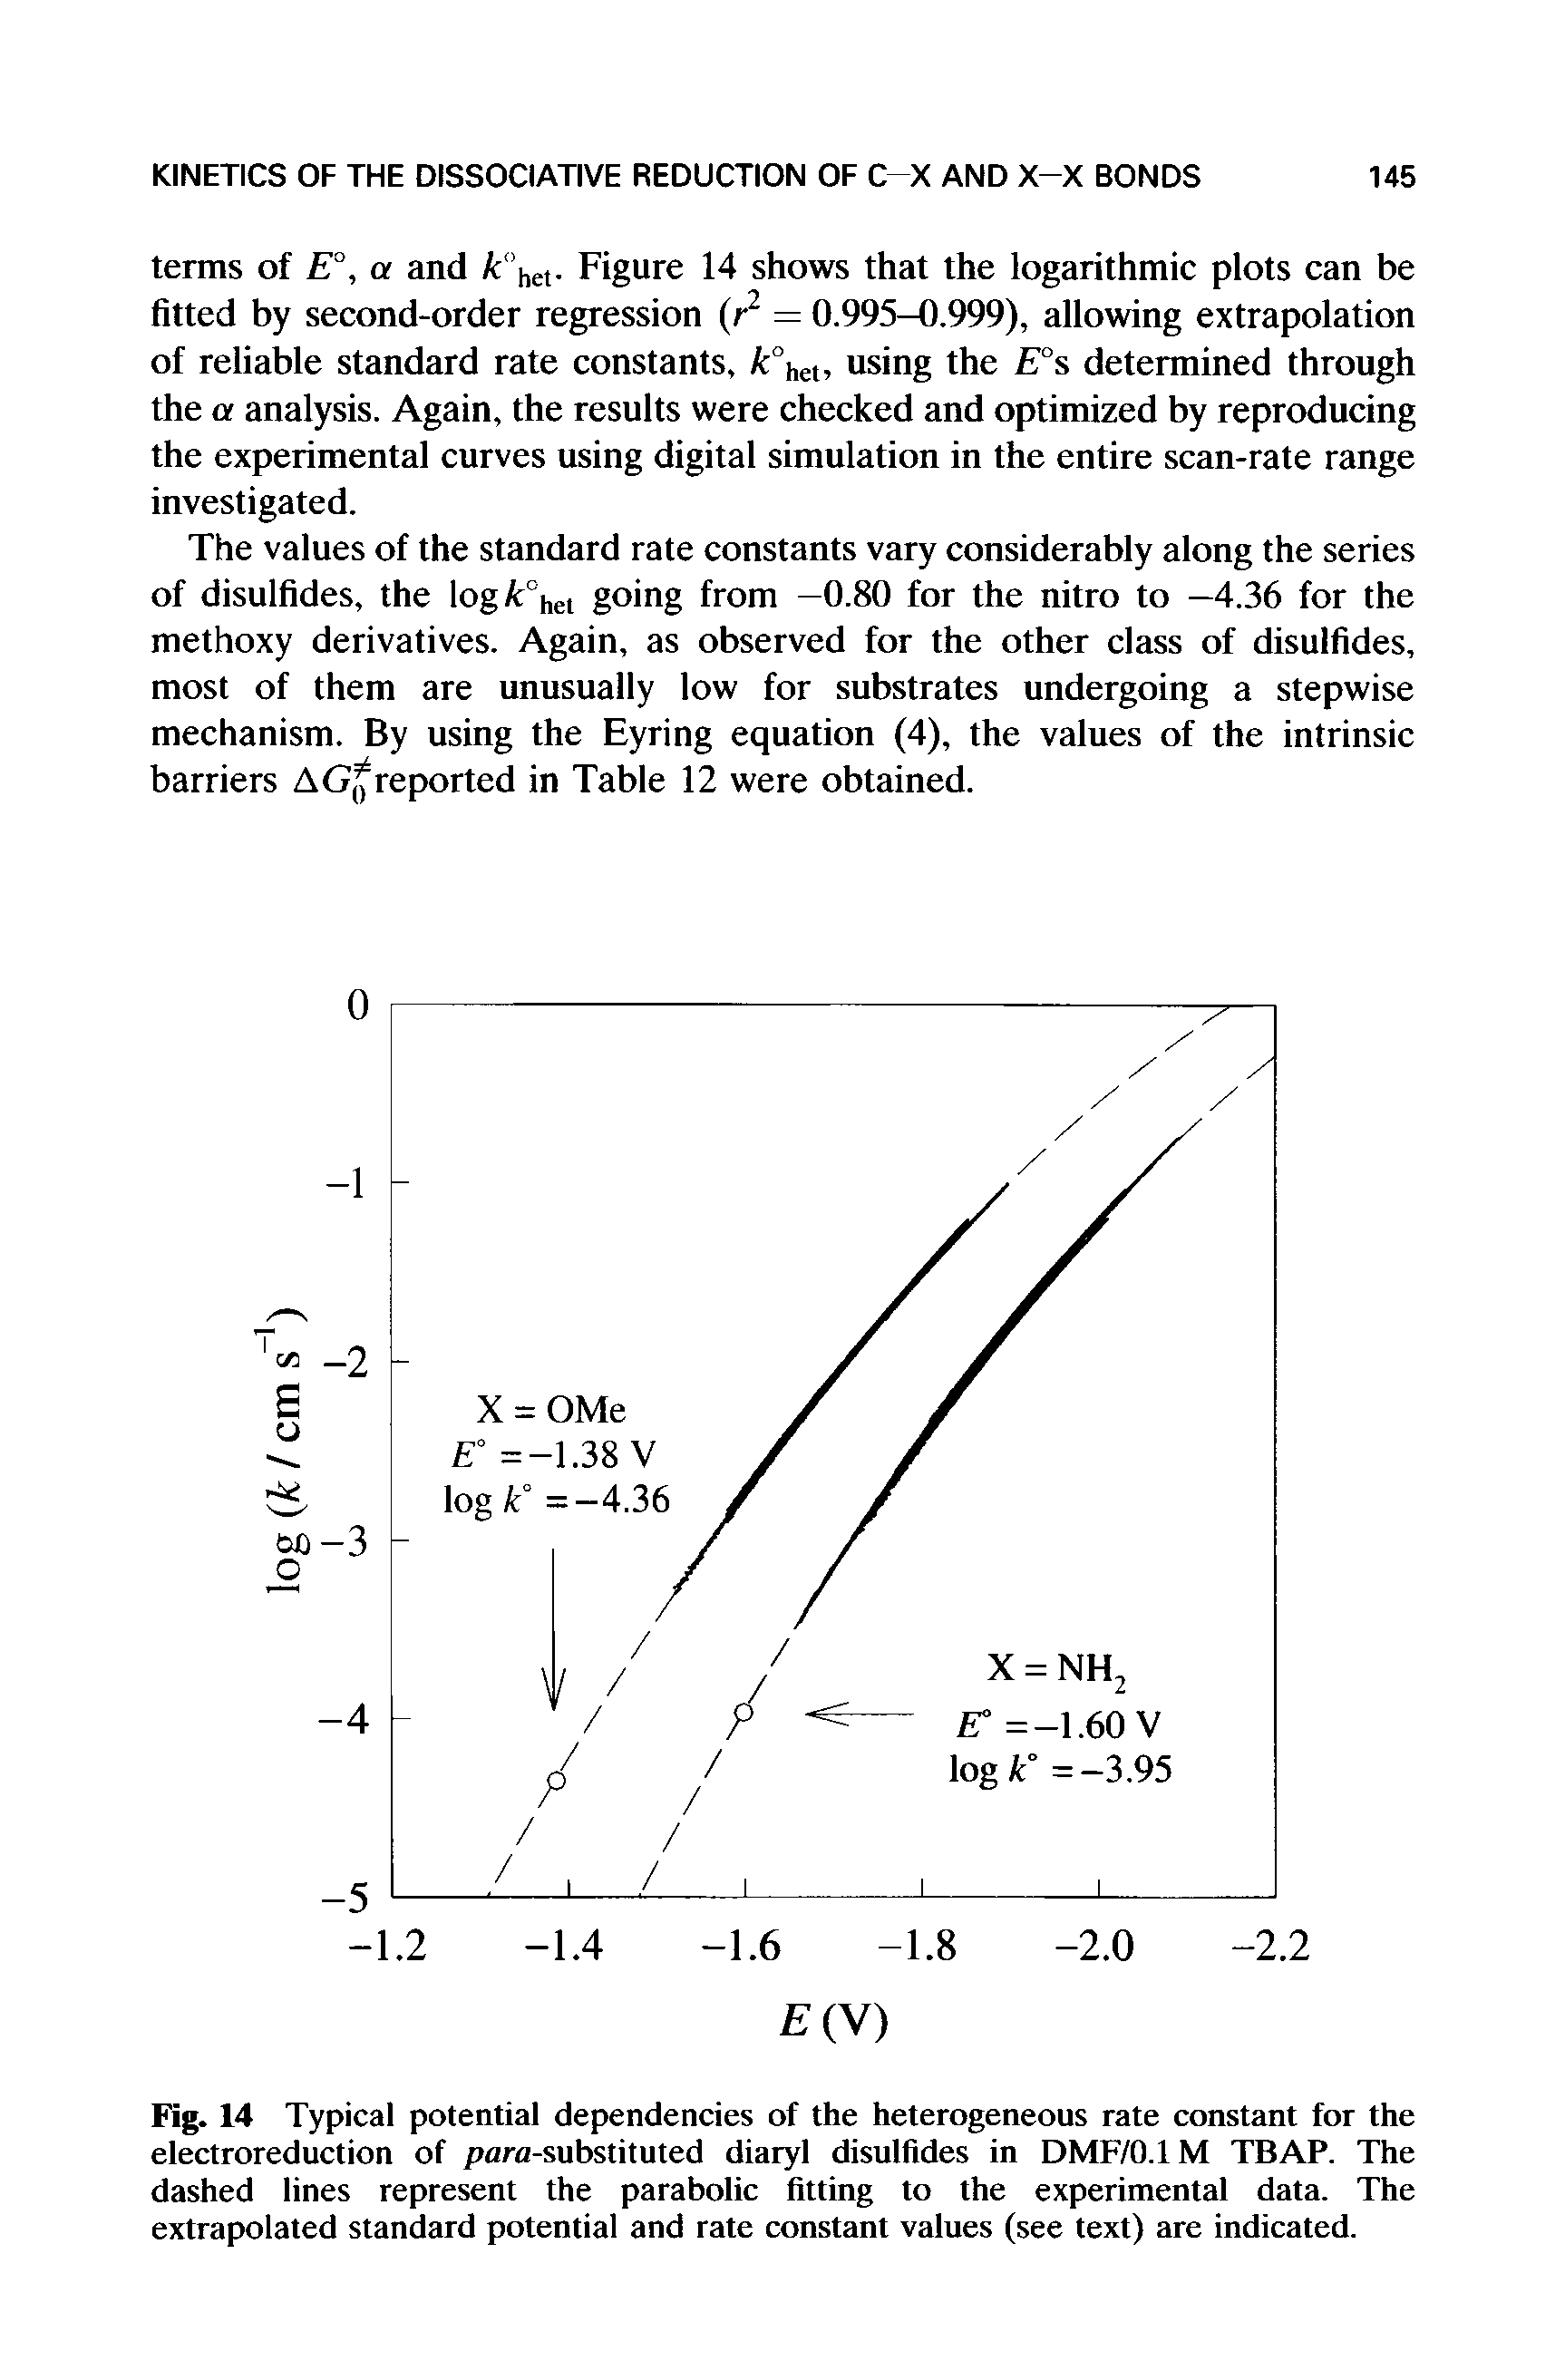 Fig. 14 Typical potential dependencies of the heterogeneous rate constant for the electroreduction of pora-substituted diaryl disulfides in DMF/O.IM TBAP. The dashed lines represent the parabolic fitting to the experimental data. The extrapolated standard potential and rate constant values (see text) are indicated.